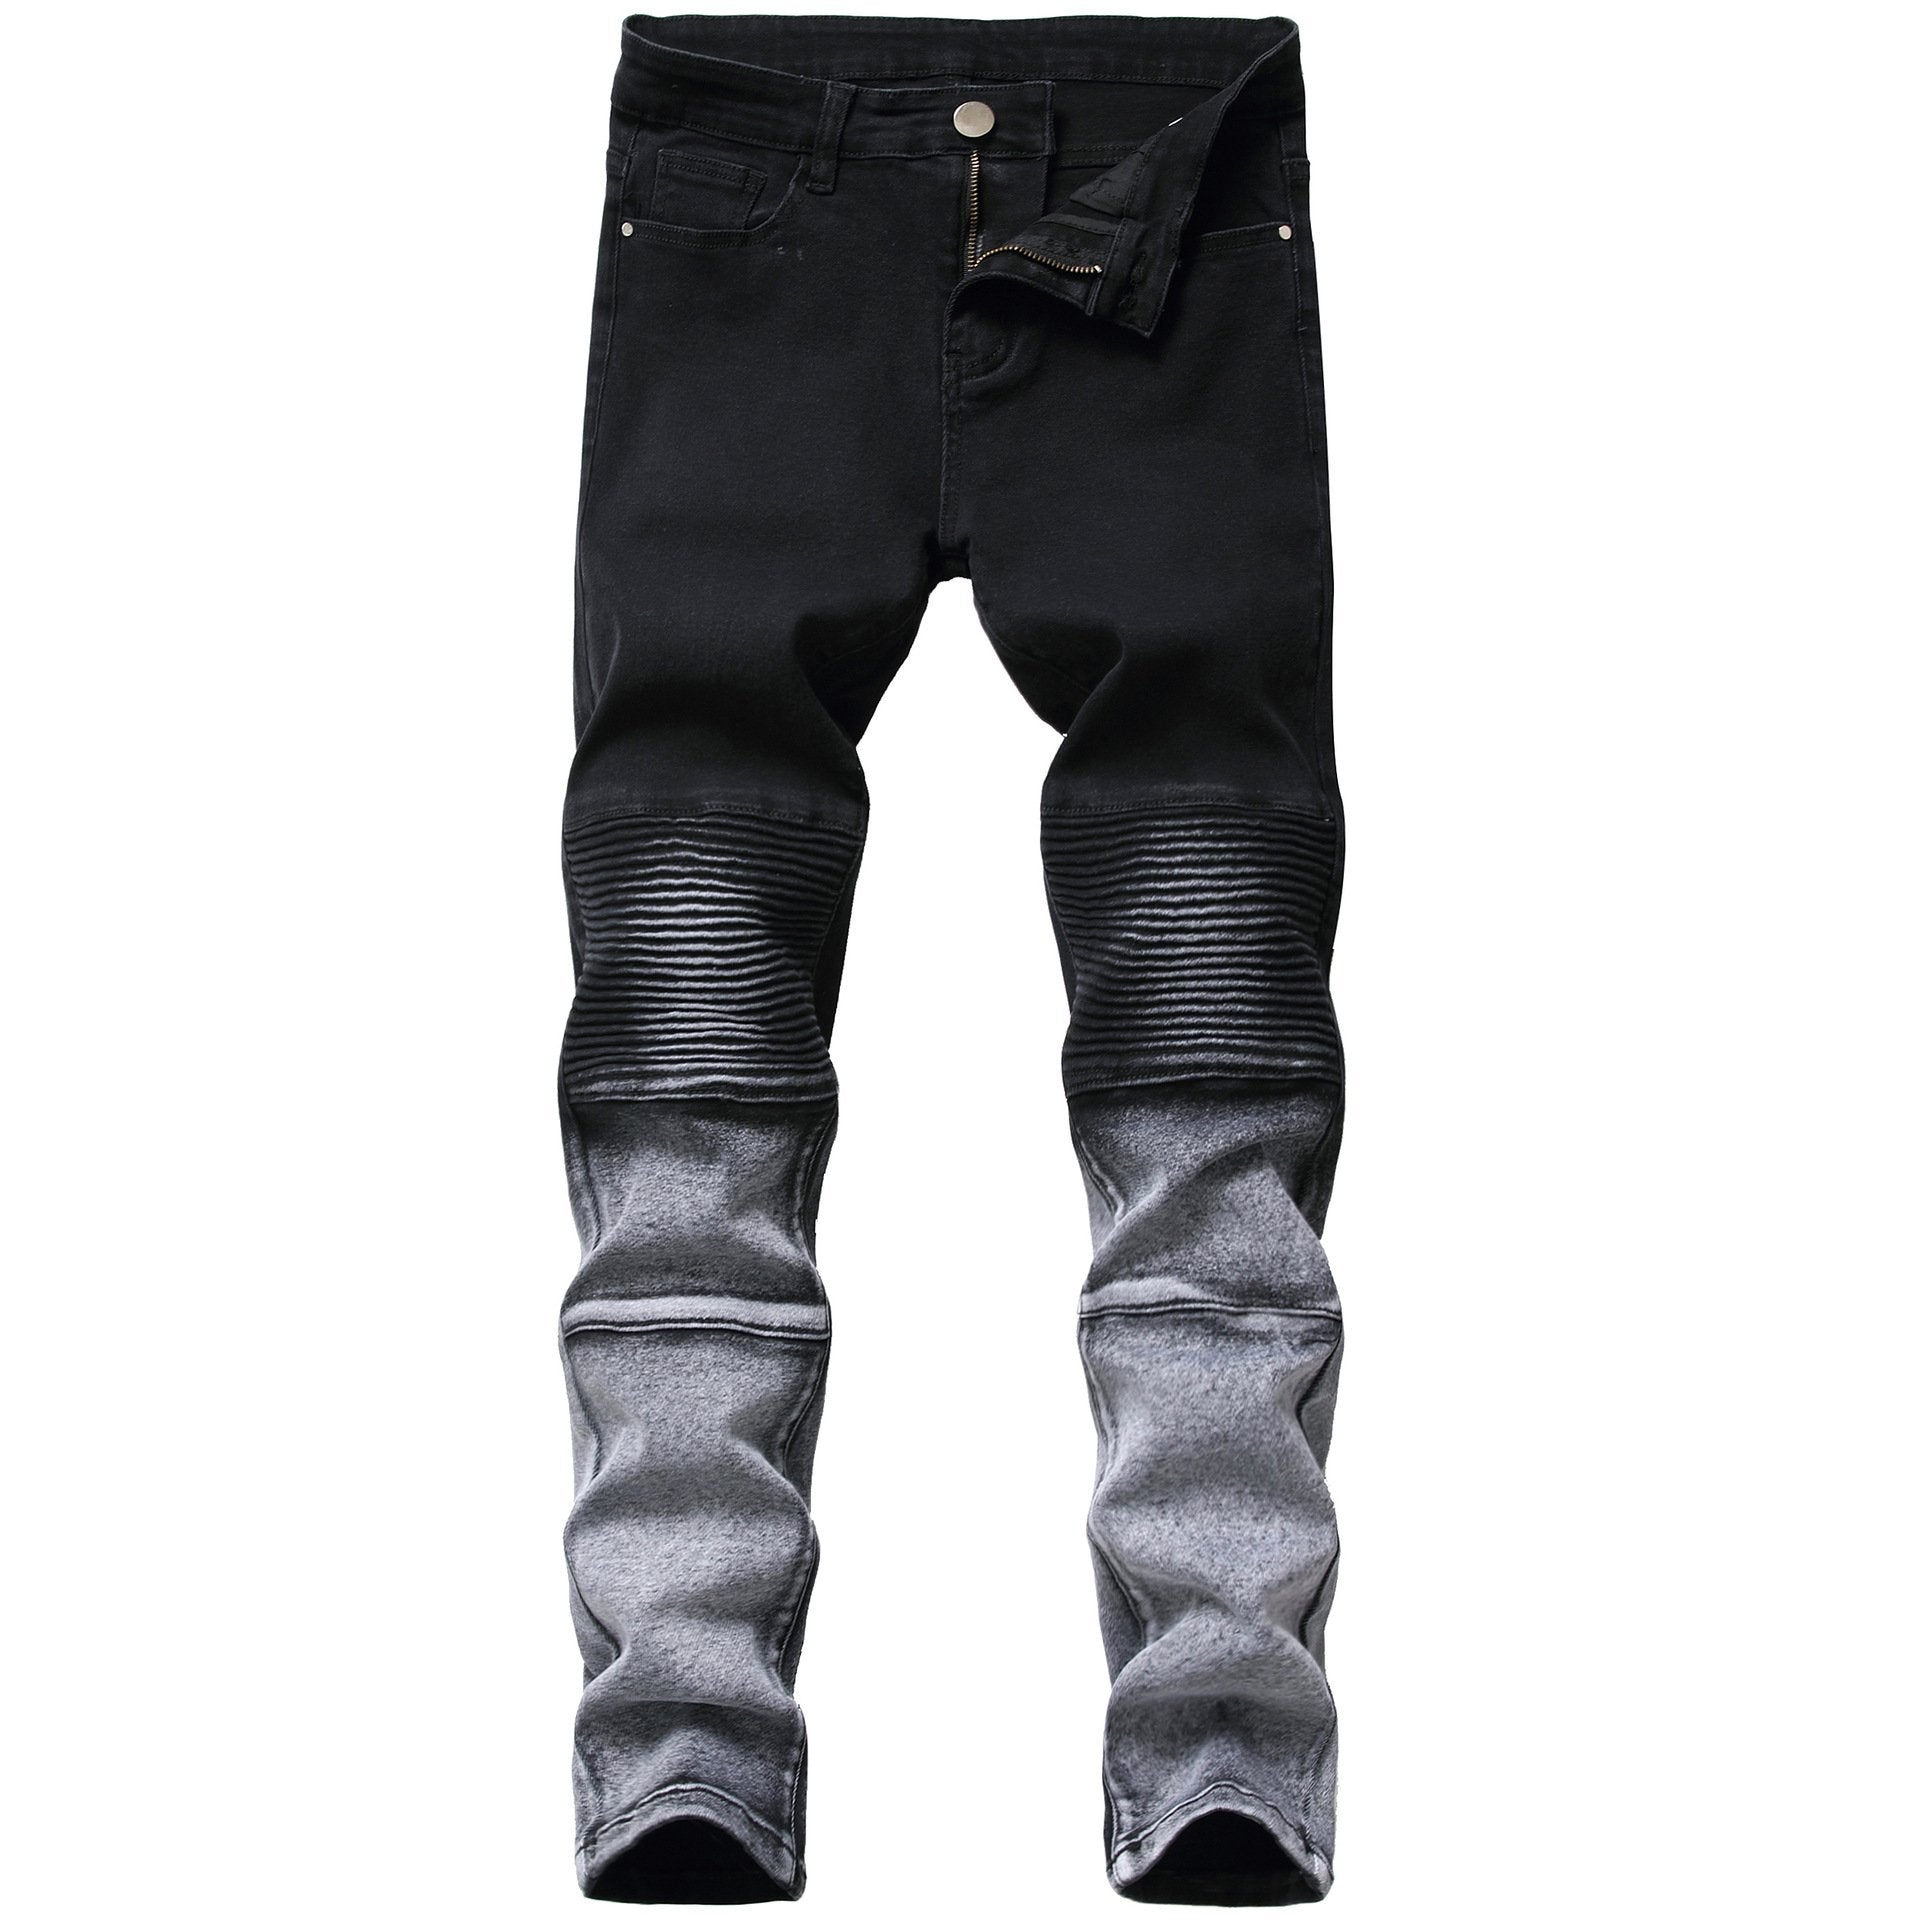 Crinkled motorcycle black jeans-Move Position